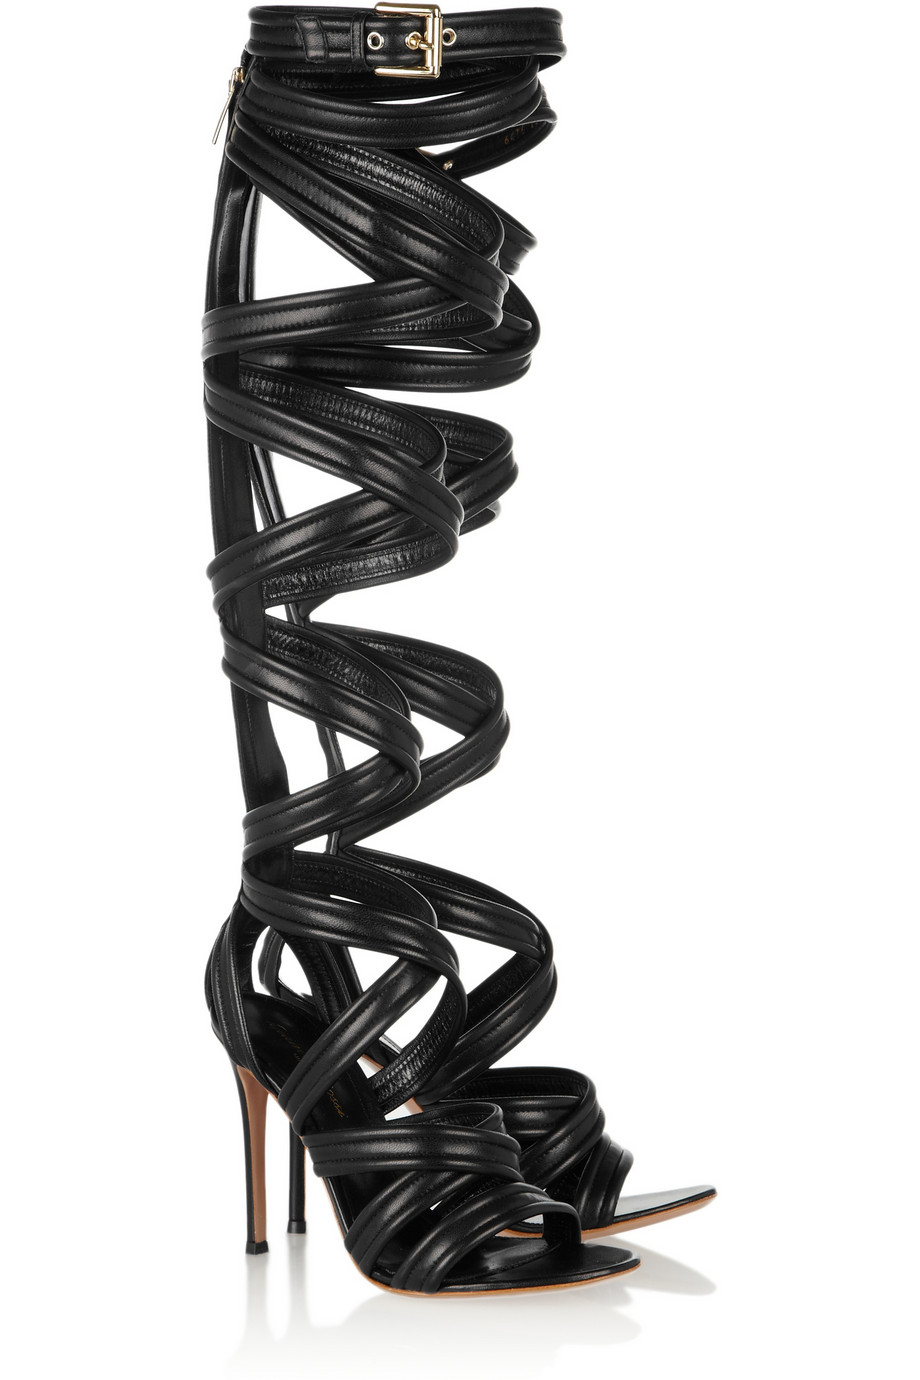 Gianvito Rossi Leather Gladiator Knee Sandals in Black | Lyst